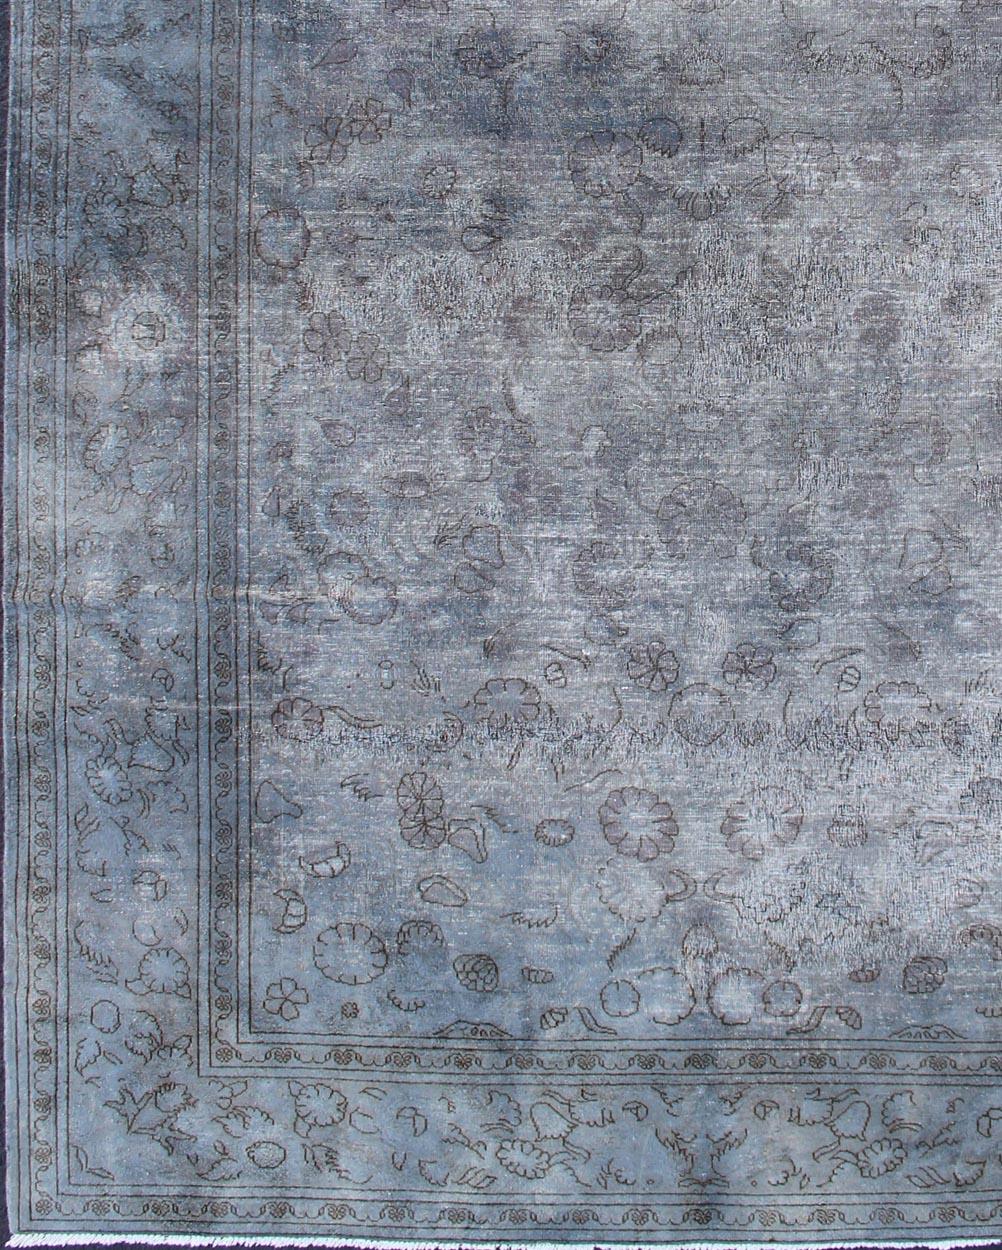 Vintage Indian Amritsar Rug in Gray Tones and Brown Highlights by Keivan Woven Arts
  
Keivan Woven Arts- Midcentury vintage Indian distressed Amritsar rug in shades of gray, keivan Woven Arts/ rug HAS-6277, country of origin / type: Indian /